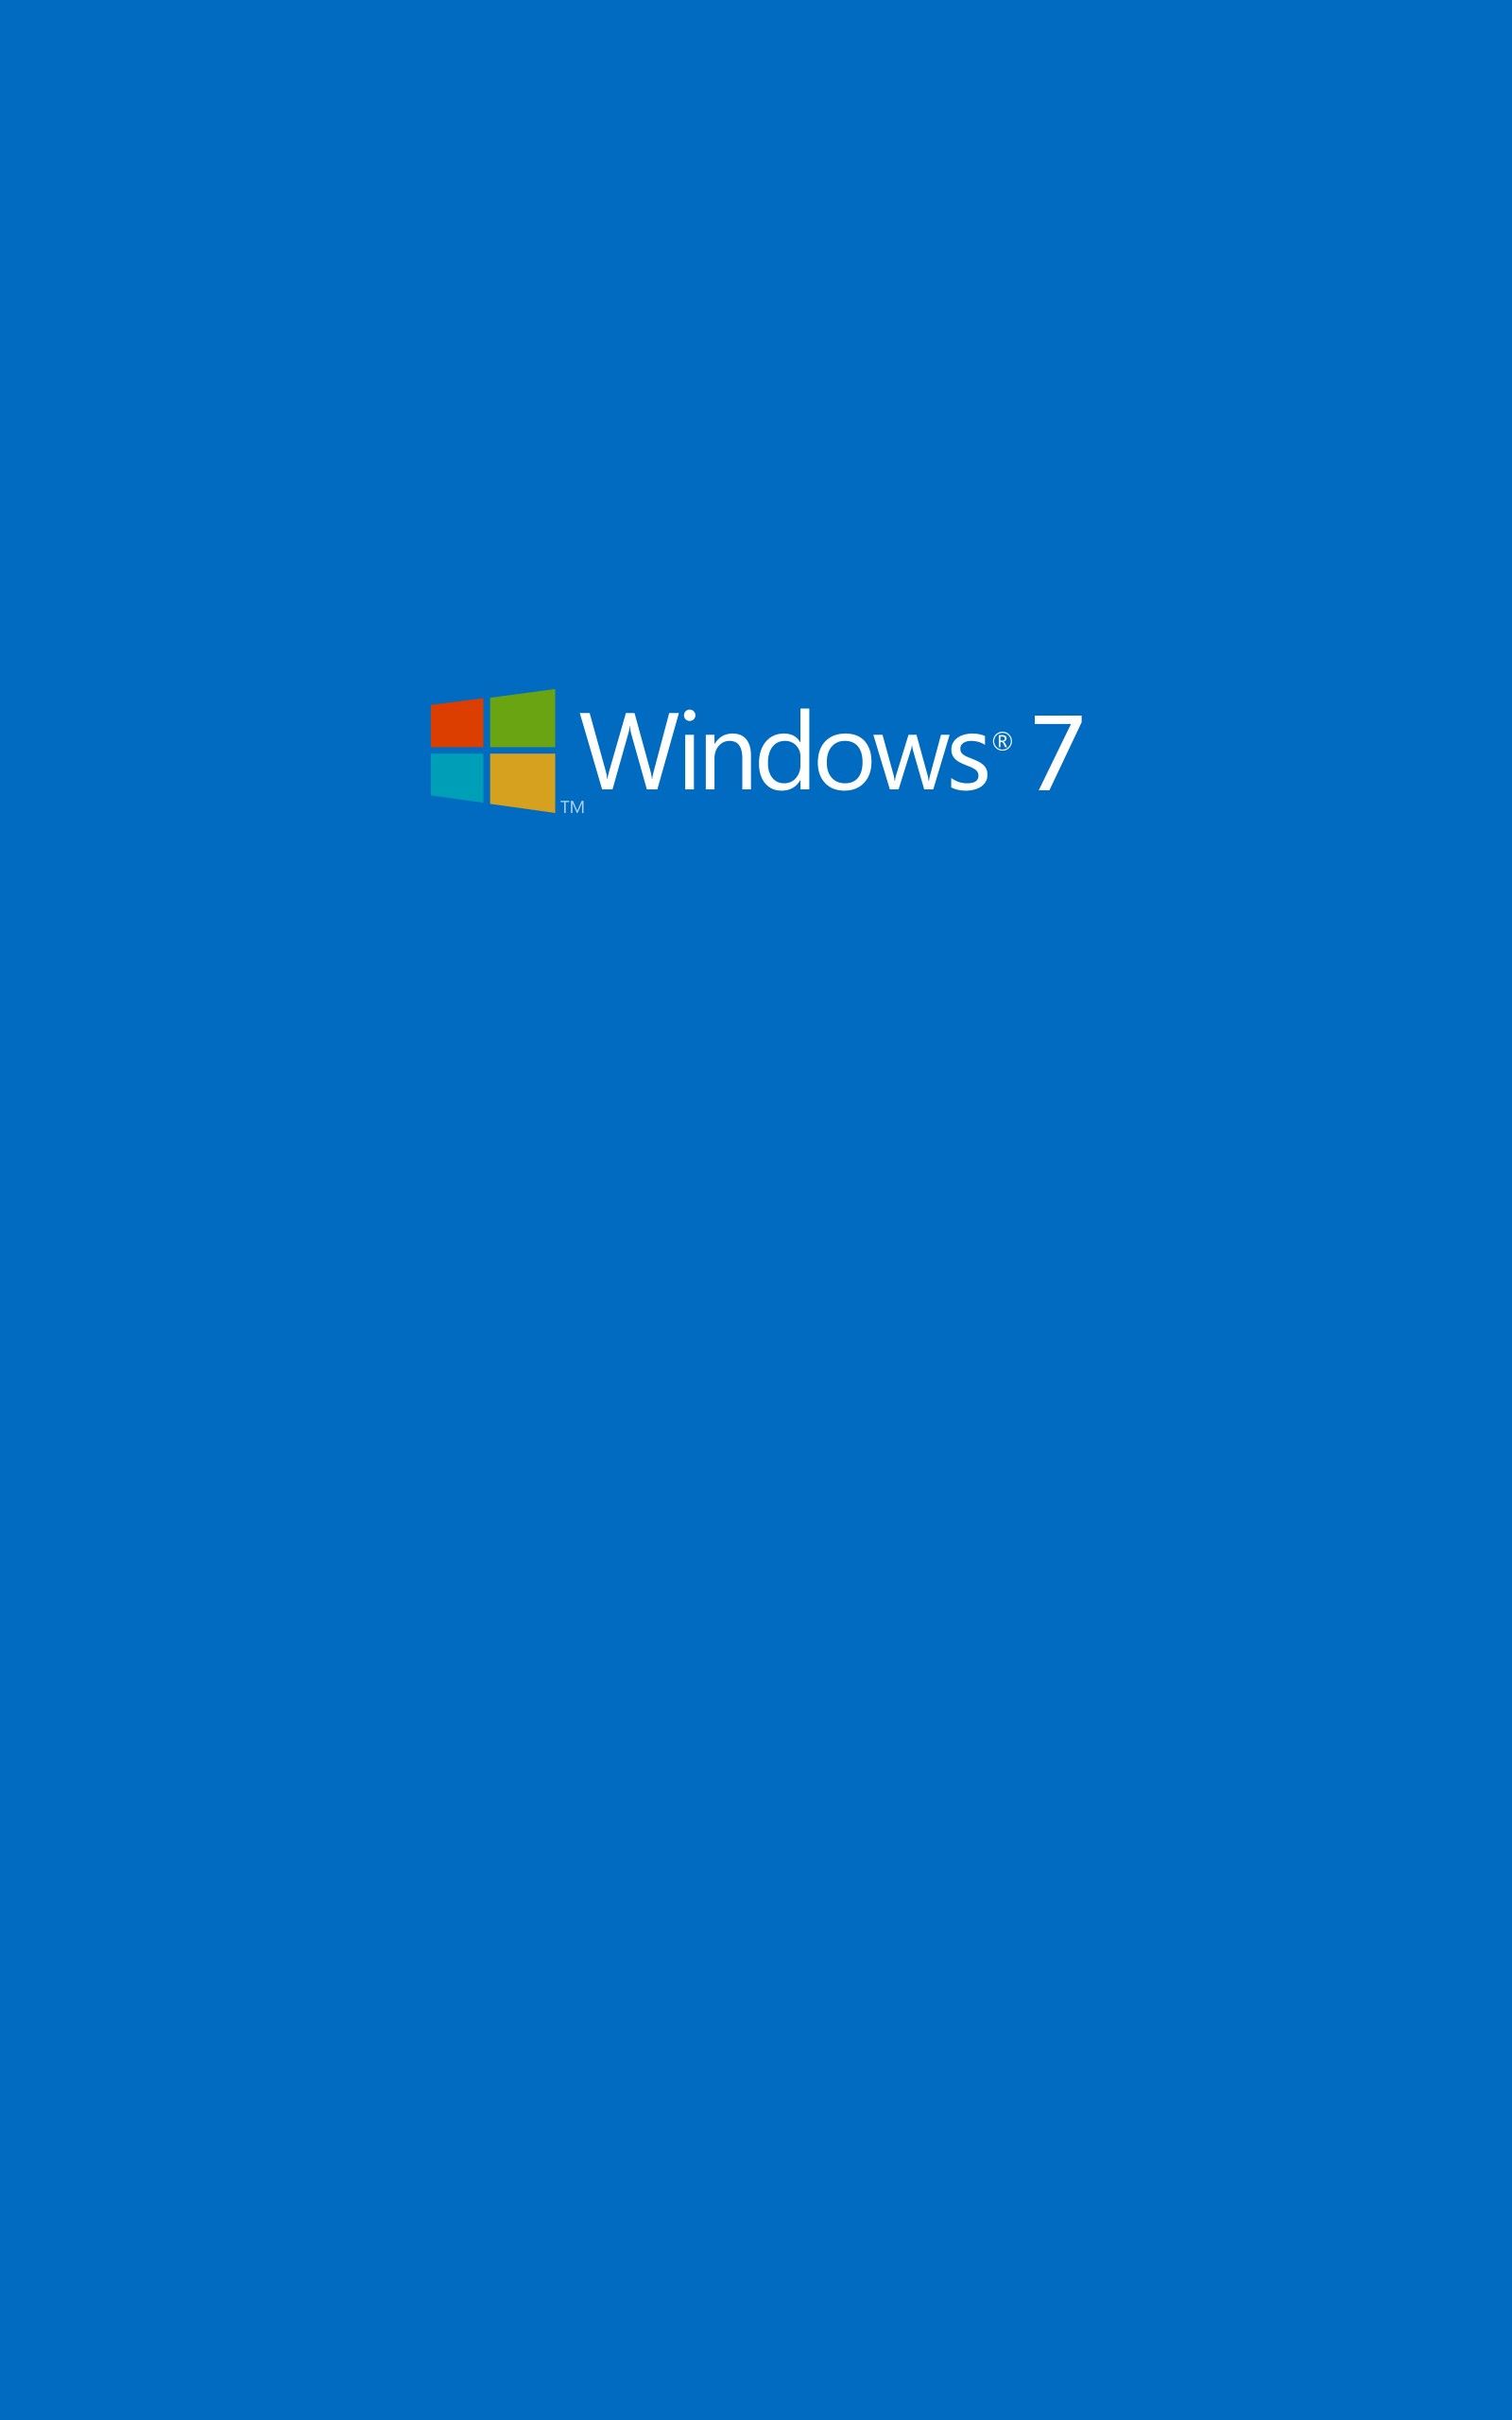 Windows Microsoft Windows, Operating systems, Minimalism, Simple background, Logo, Portrait display Wallpaper HD / Desktop and Mobile Background